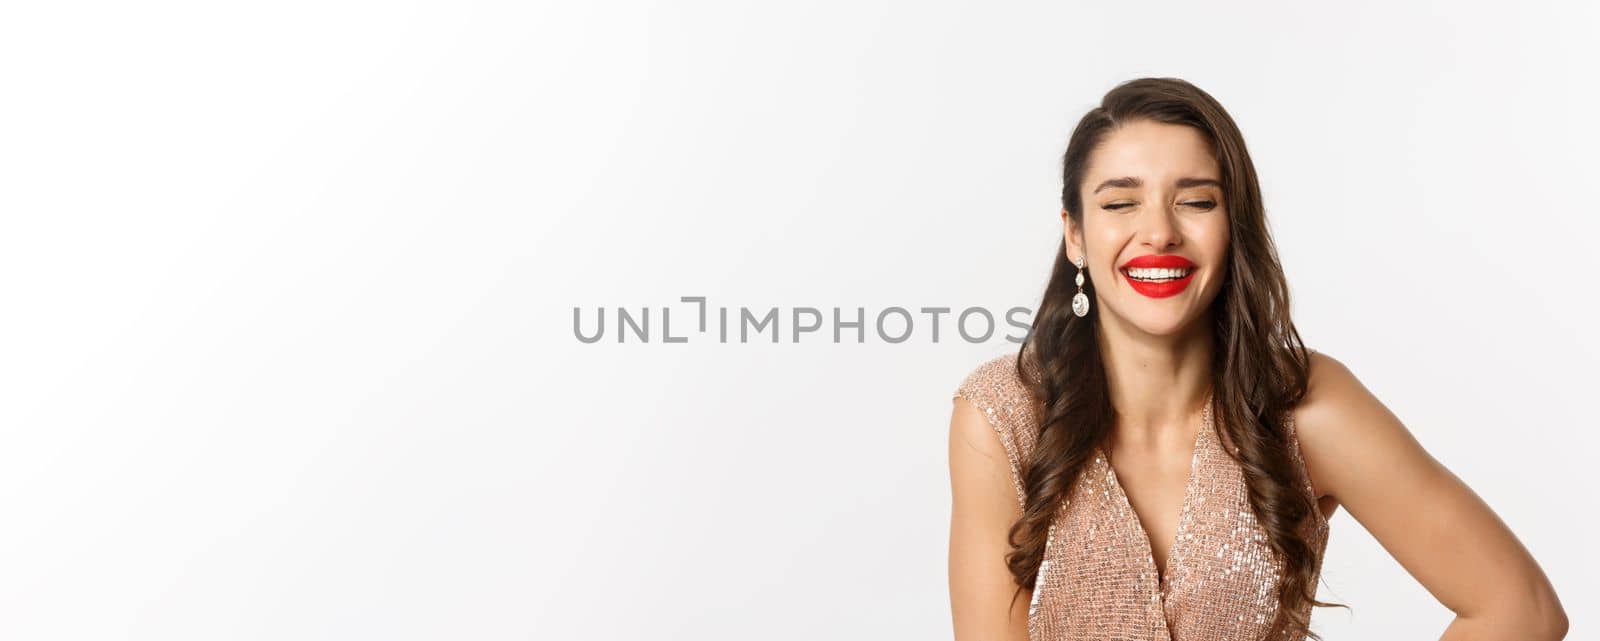 Concept of New Year celebration and winter holidays. Close-up of elegant woman in dress, with red lips, laughing and looking happy, standing over white background.